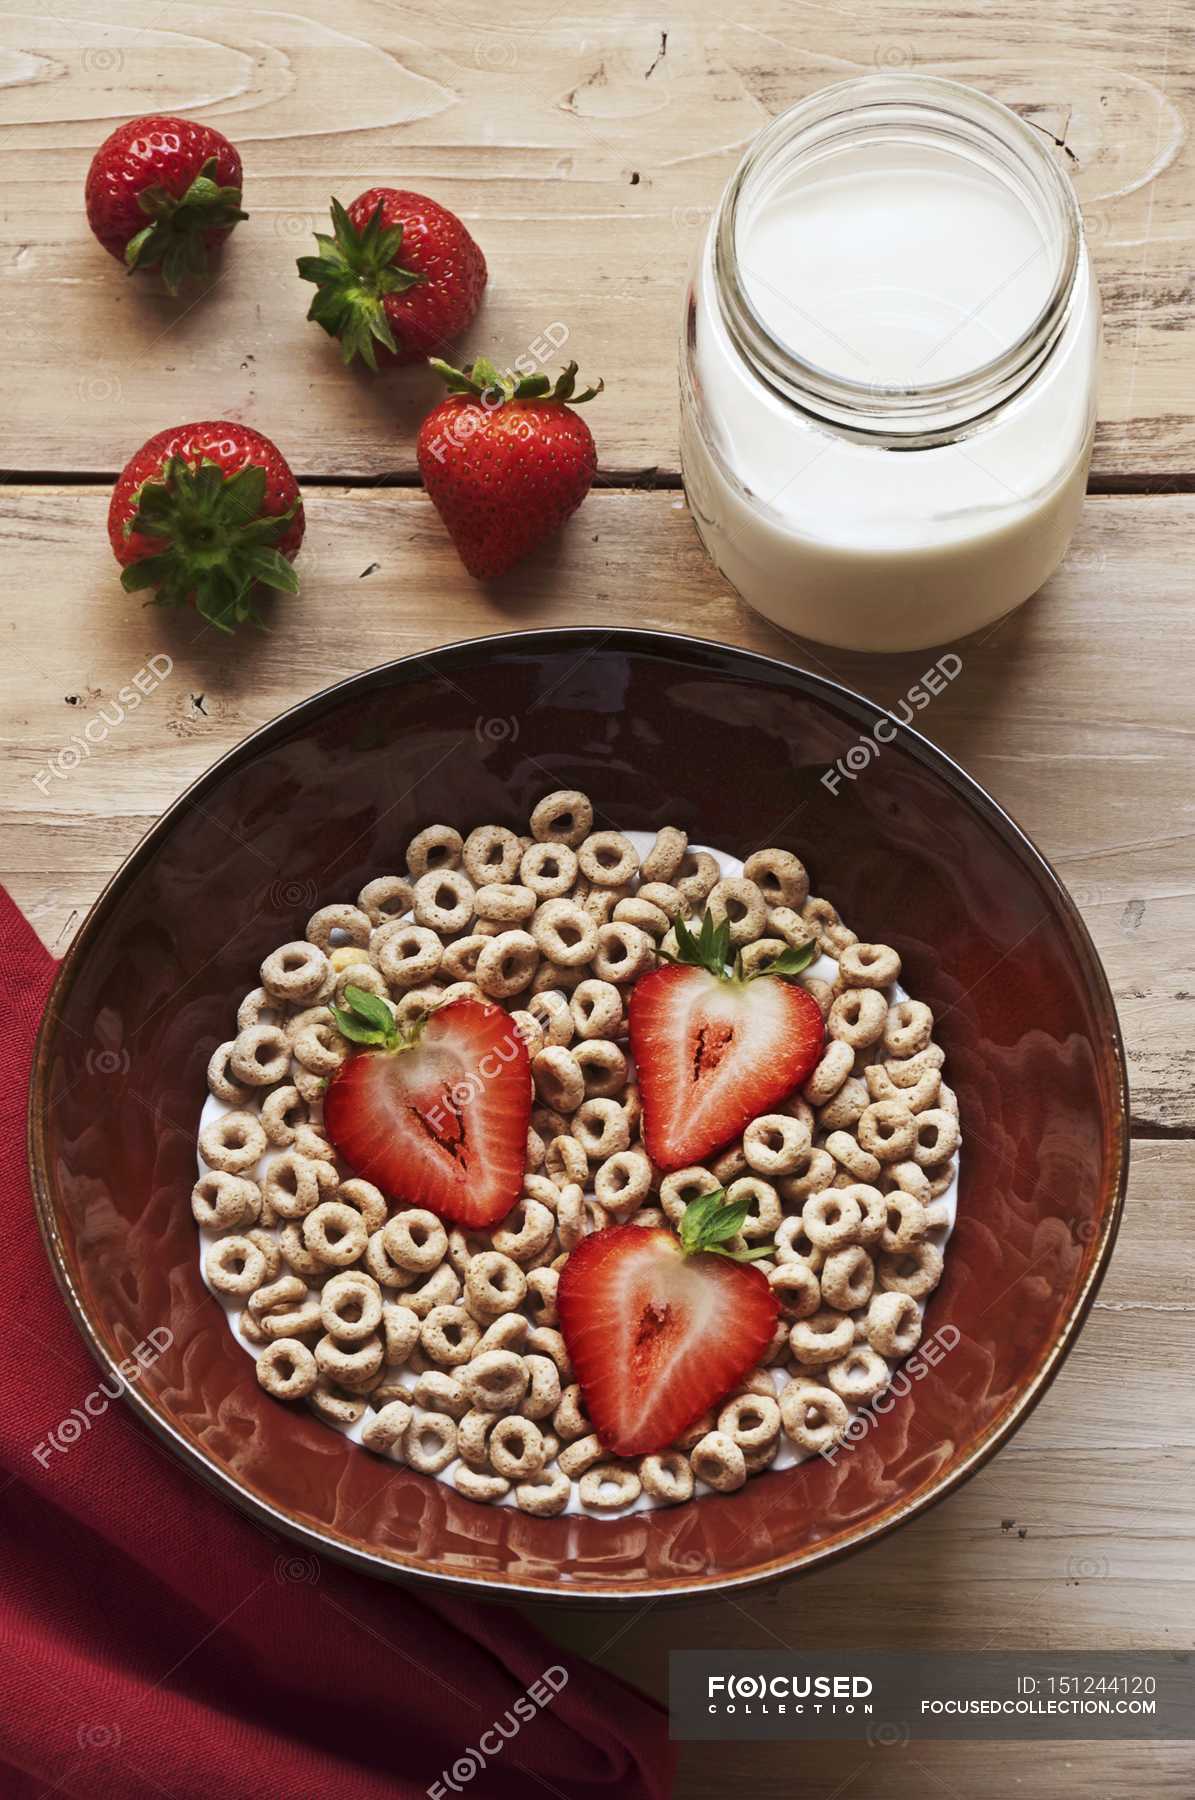 Bowl of rolled oat cereal — recipe, food - Stock Photo | #151244120